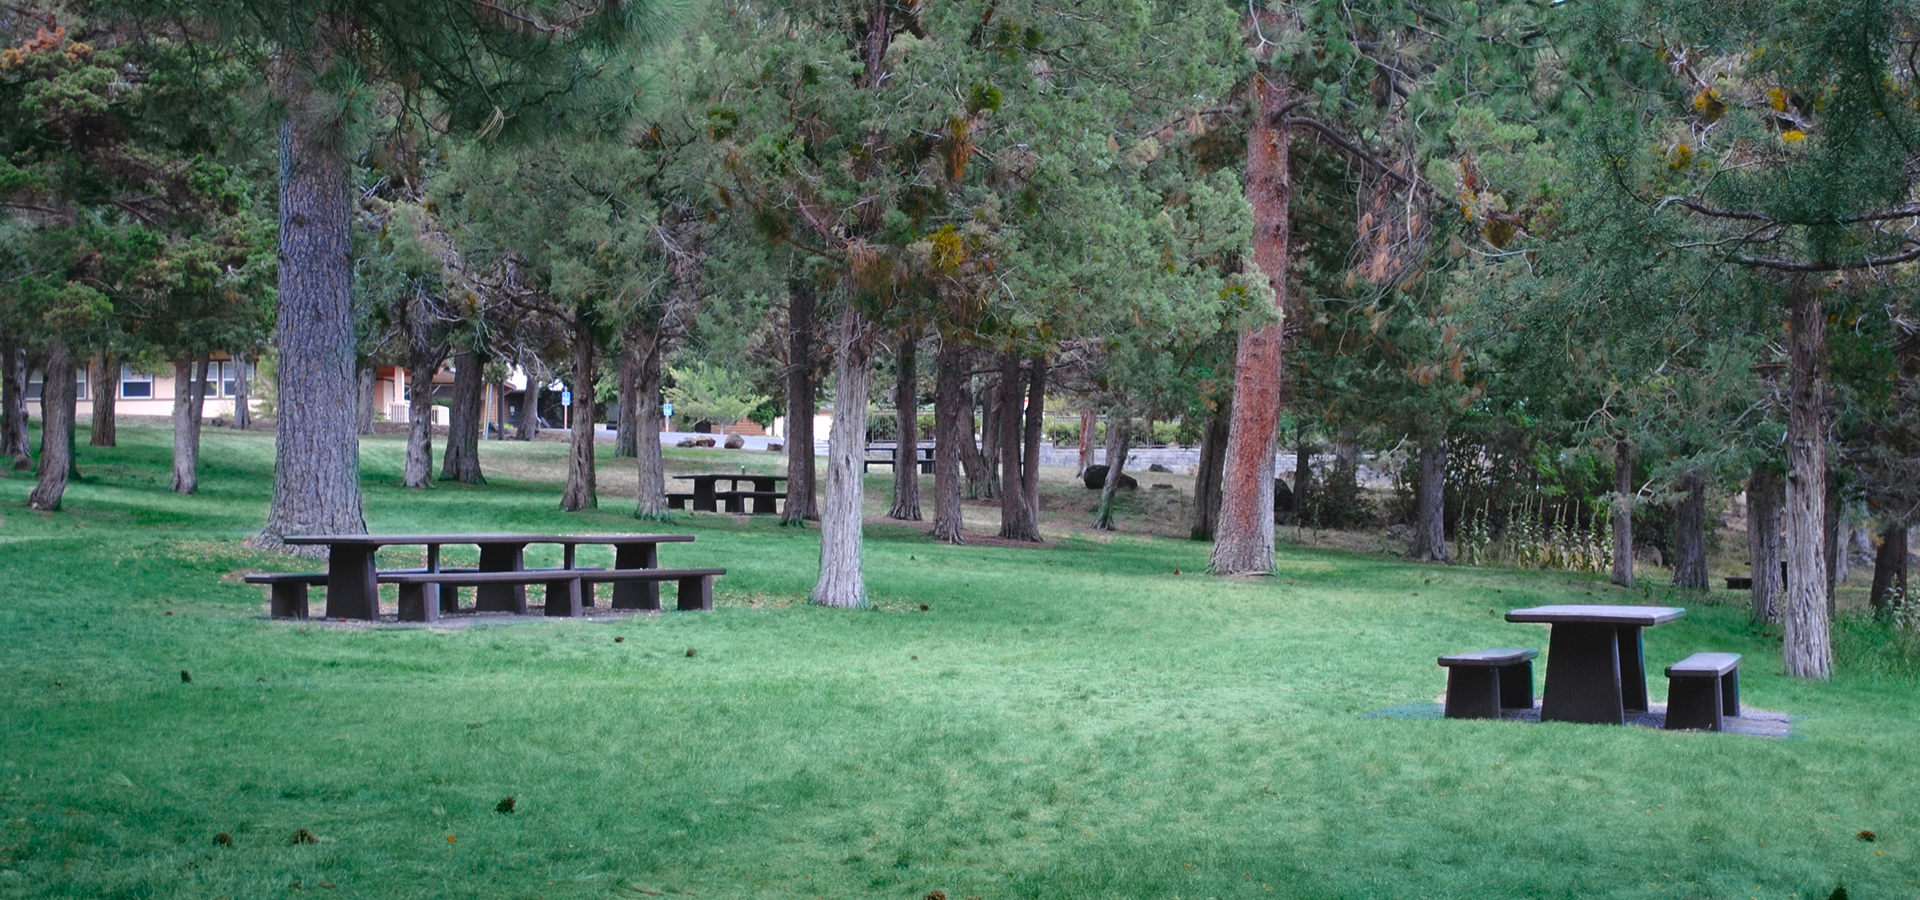 Picnic tables at Sawyer Park.